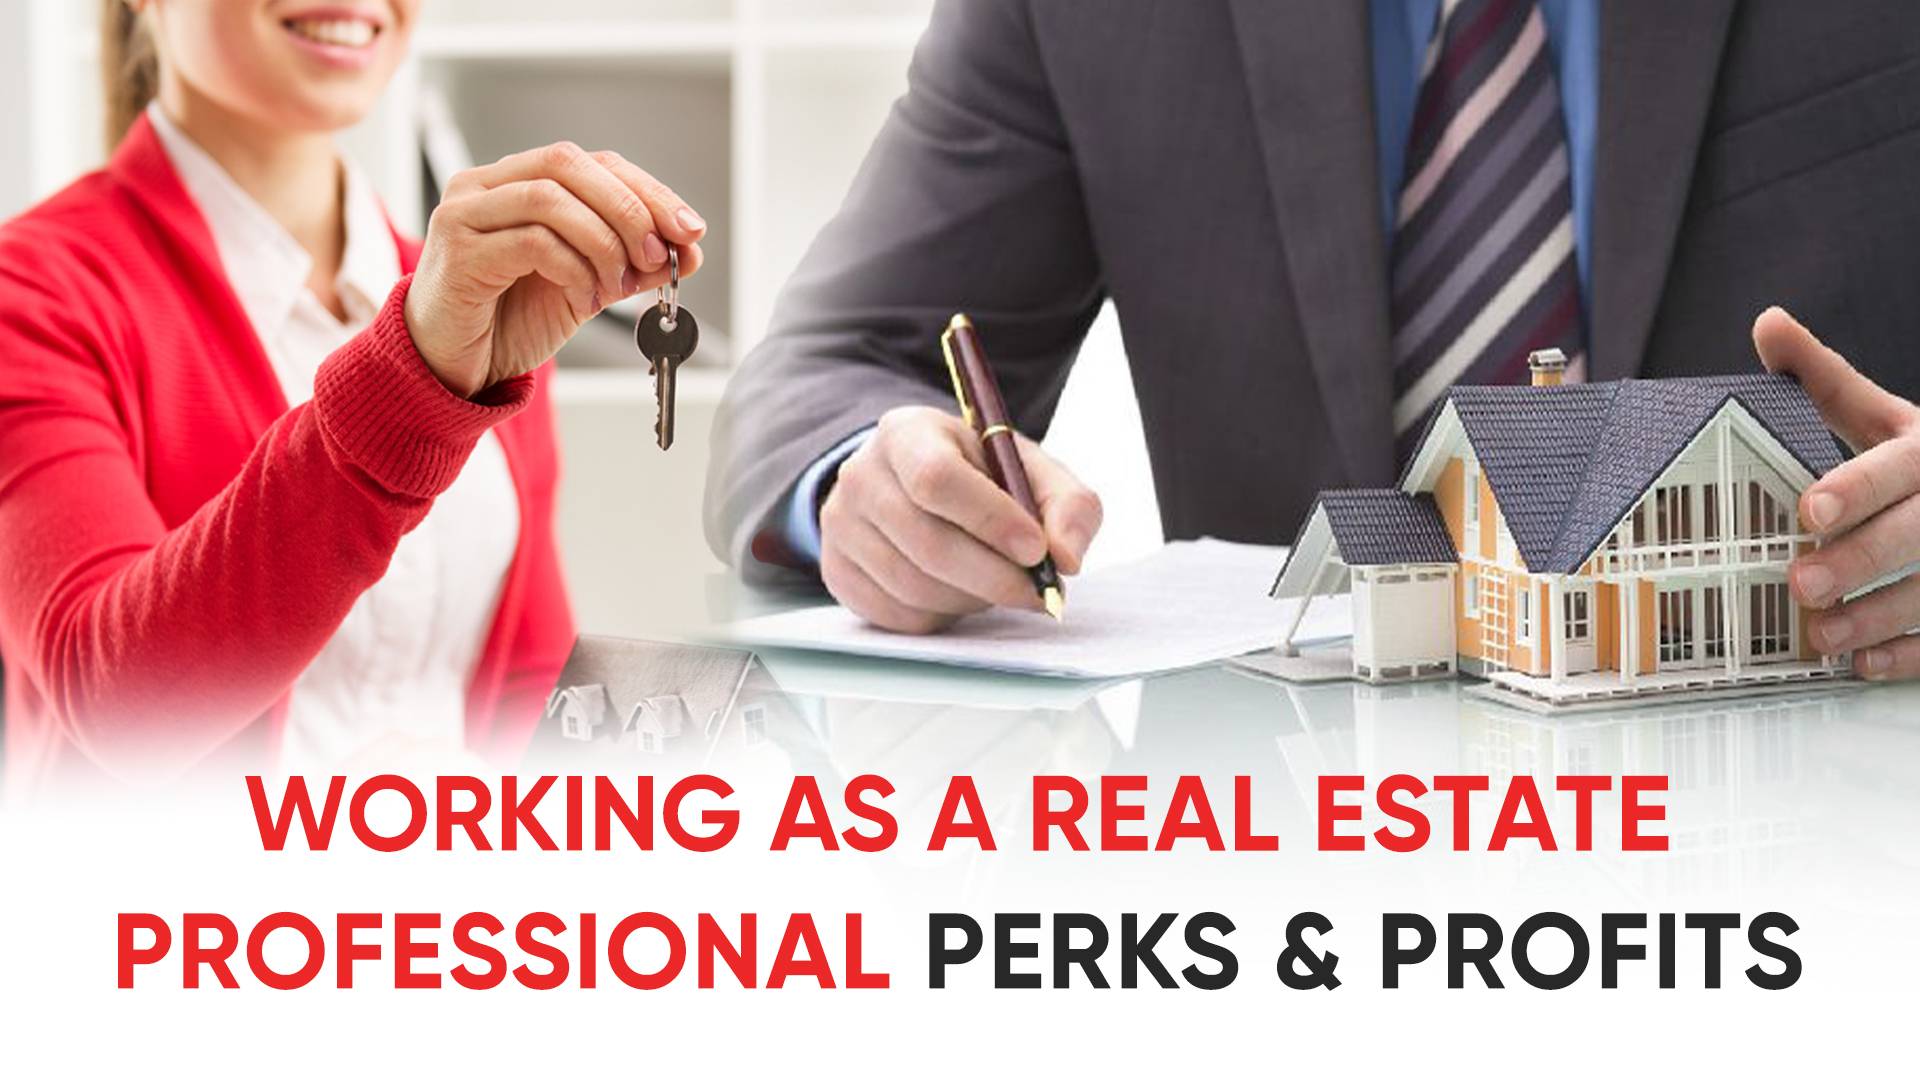 Working as a Real Estate Professional Perks and Profits